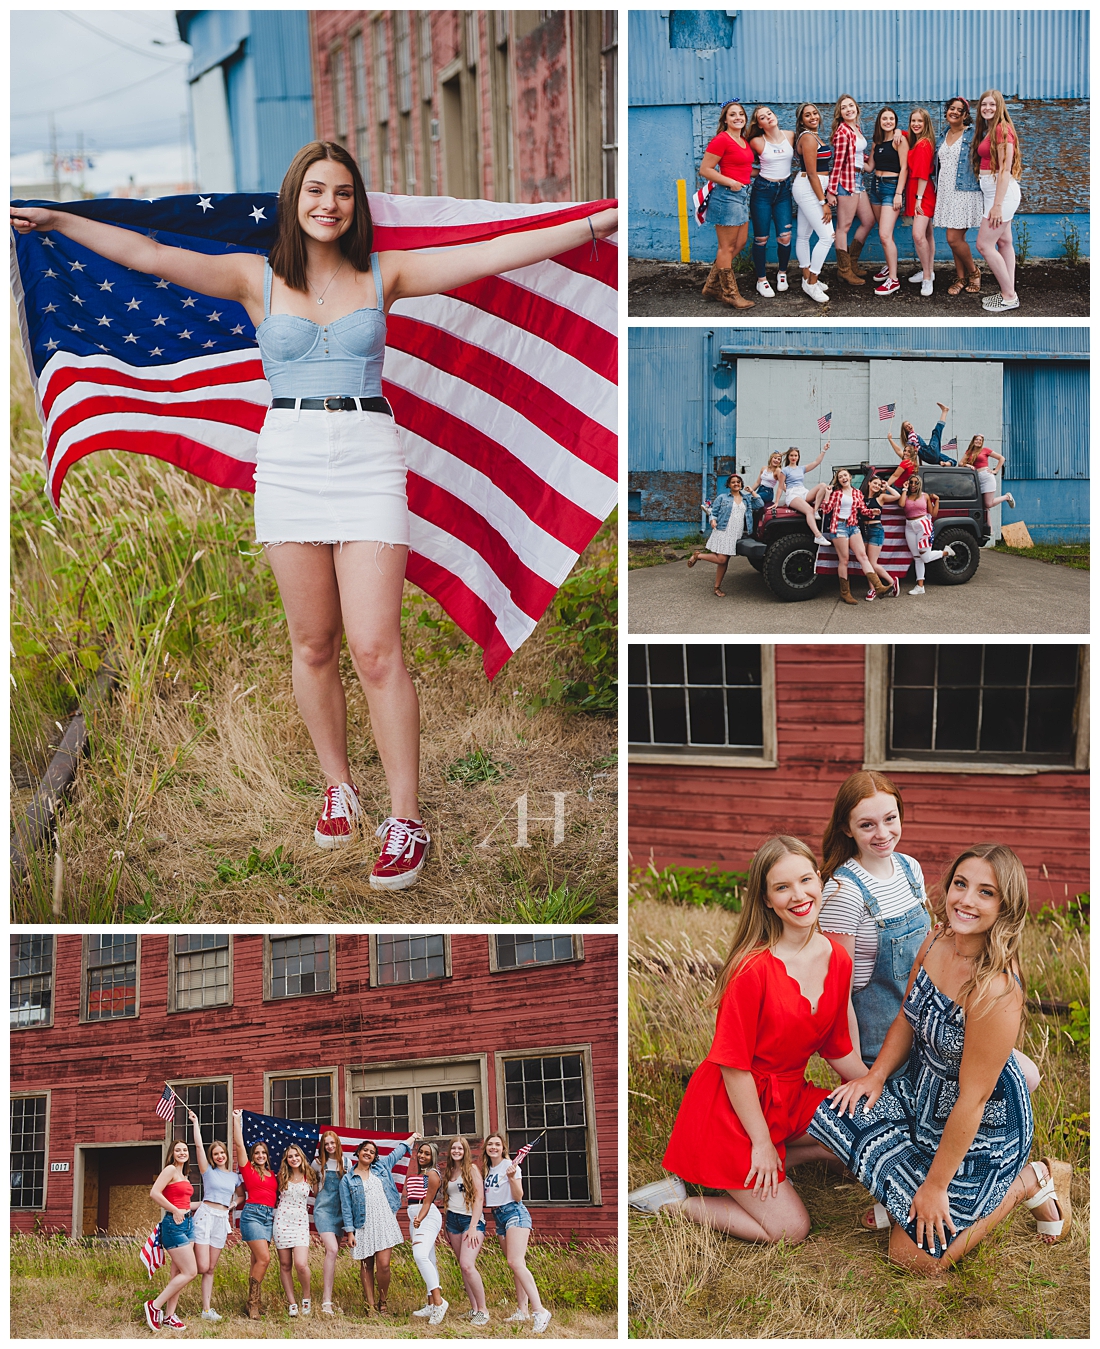 4th of July Themed Photoshoot with Flag and Red, White, and Blue Outfit Inspiration | Photographed by the Best Tacoma Senior Photographer Amanda Howse